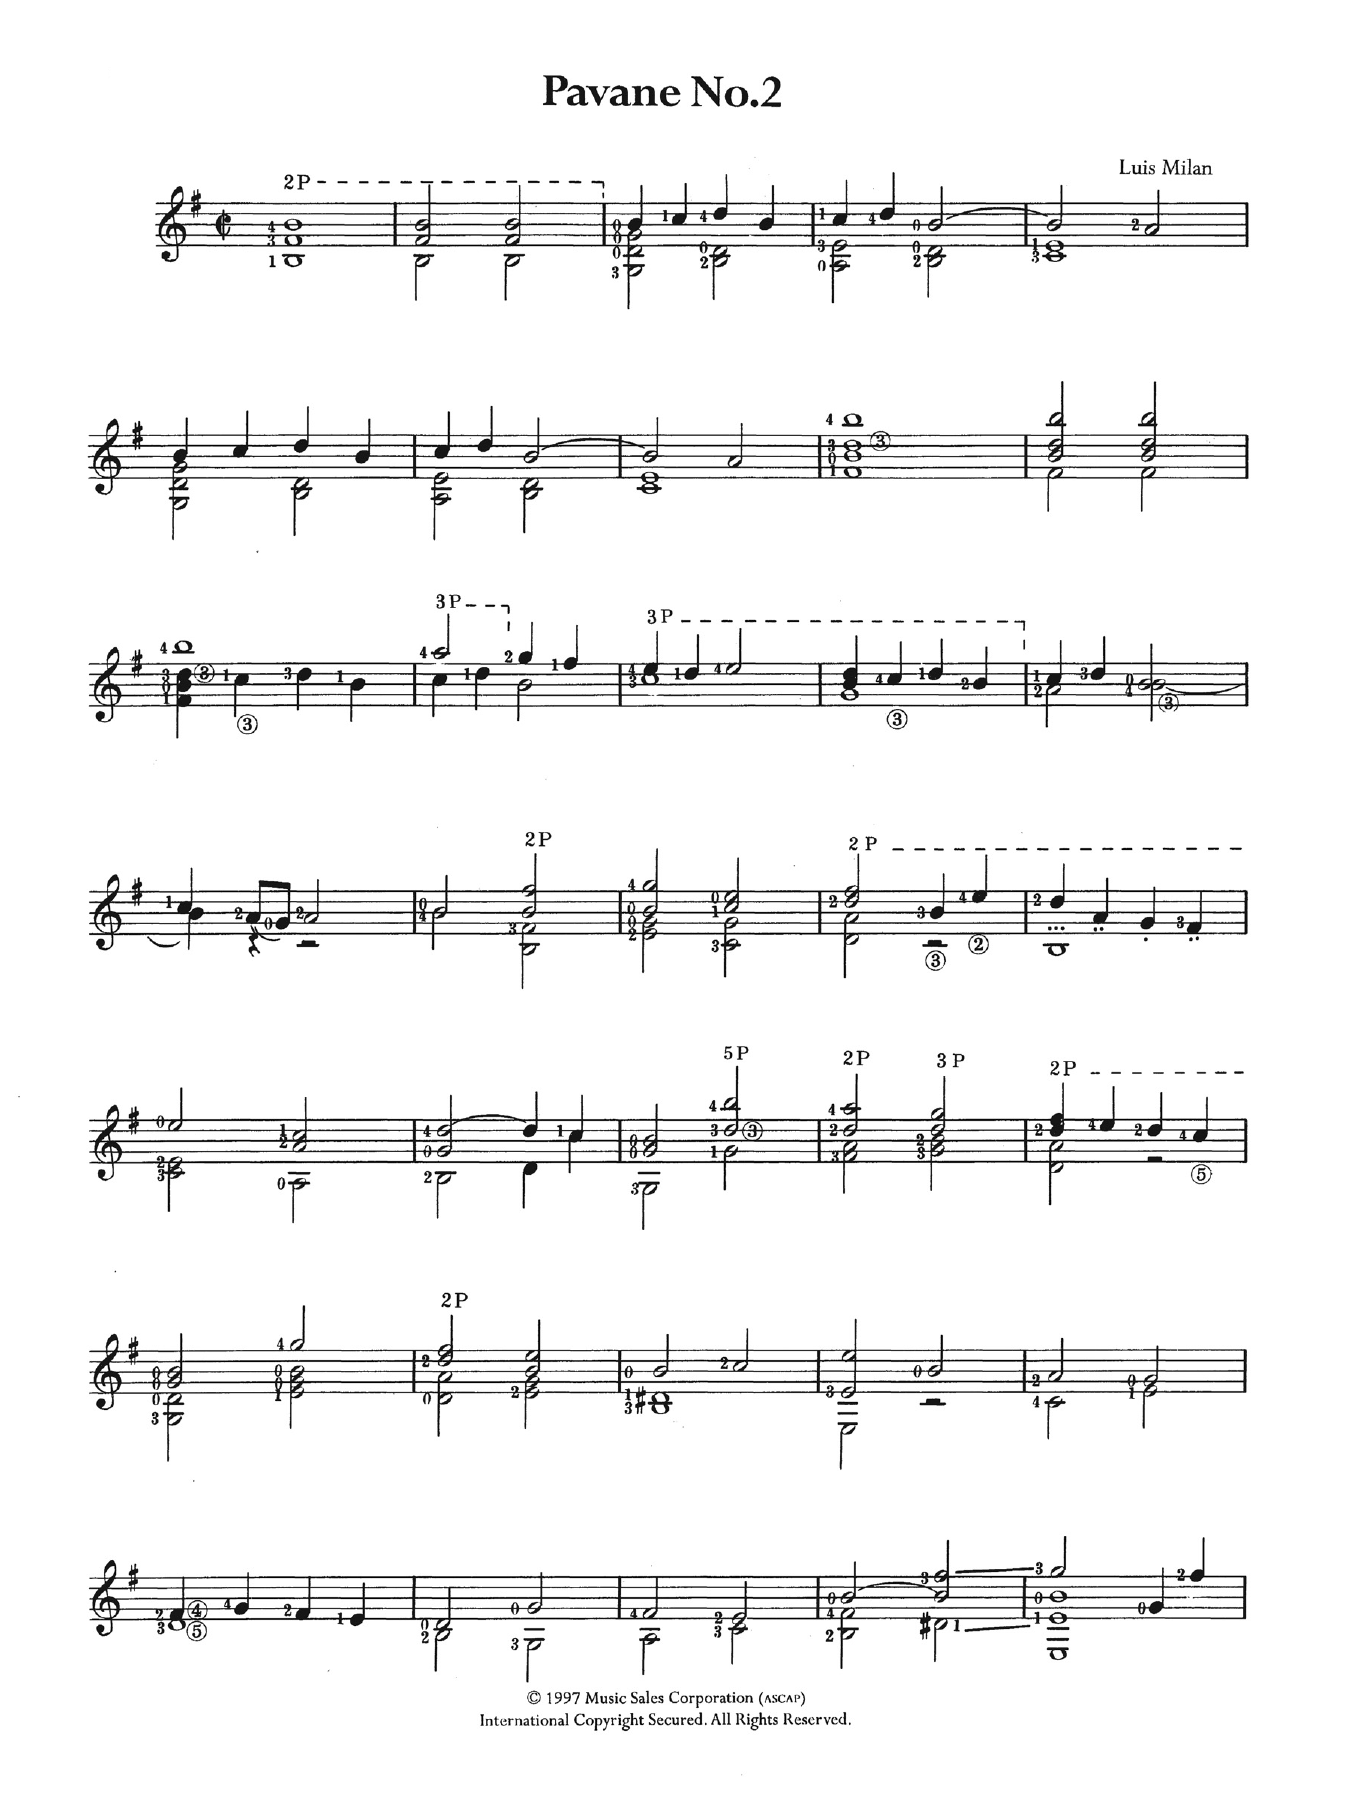 Luis de Milan Pavane No. 2 sheet music preview music notes and score for Guitar including 2 page(s)